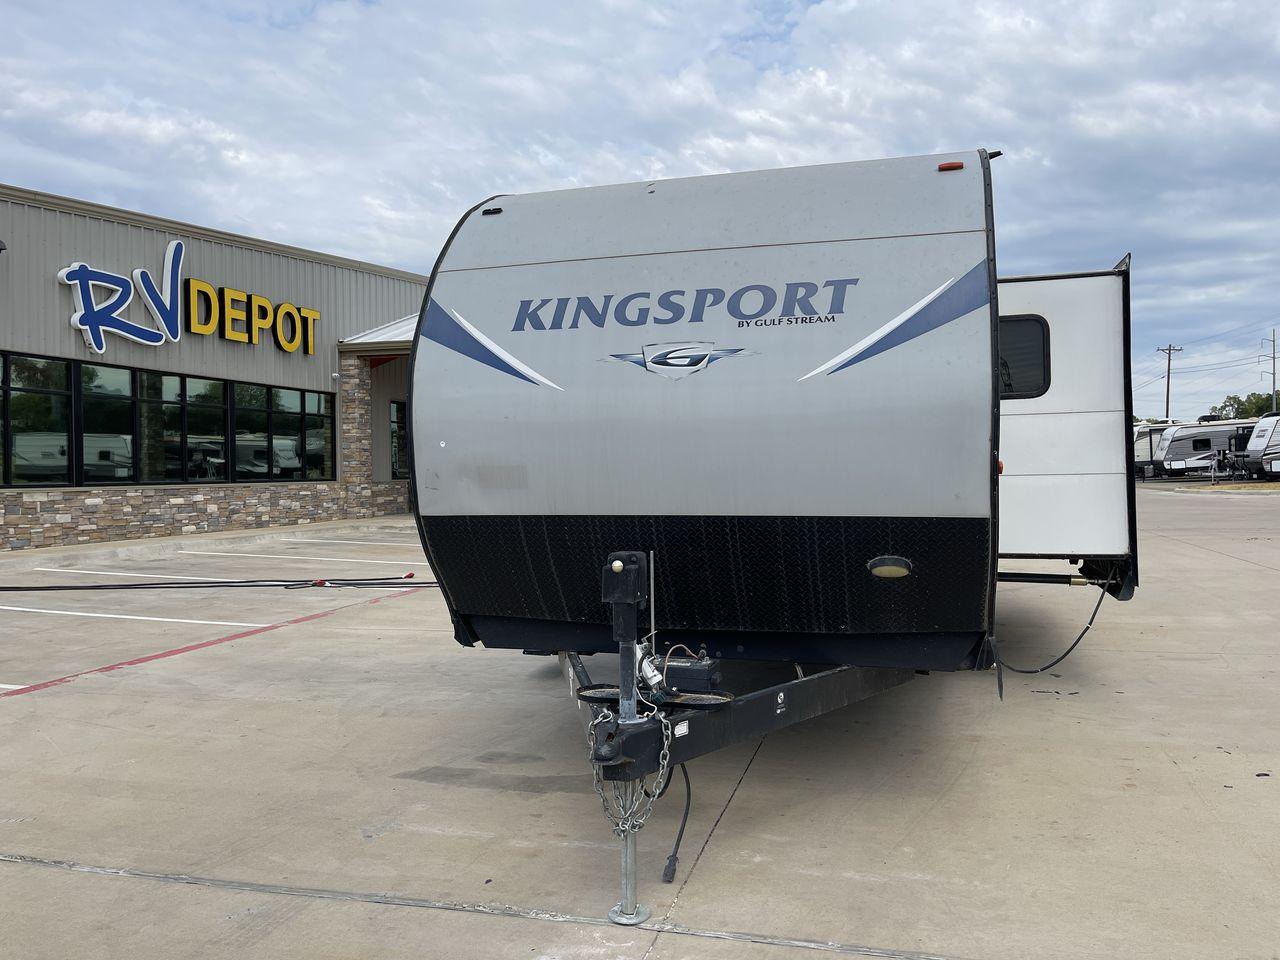 2018 GRAY KINGSPORT 301TB (1NL1GTS2XJ1) , Length: 33.58 ft. | Dry Weight: 6,845 lbs. | Slides: 1 transmission, located at 4319 N Main Street, Cleburne, TX, 76033, (817) 221-0660, 32.435829, -97.384178 - The 2018 Kingsport 301TB travel trailer will help you prepare for your next vacation. This well-thought-out, kid-friendly RV is your ticket to enjoyable and unique camping trips. The dimensions of this unit are 34.08 ft in length, 8 ft in width, and 10.75 ft in height. It has a dry weight of 6,845 l - Photo #0